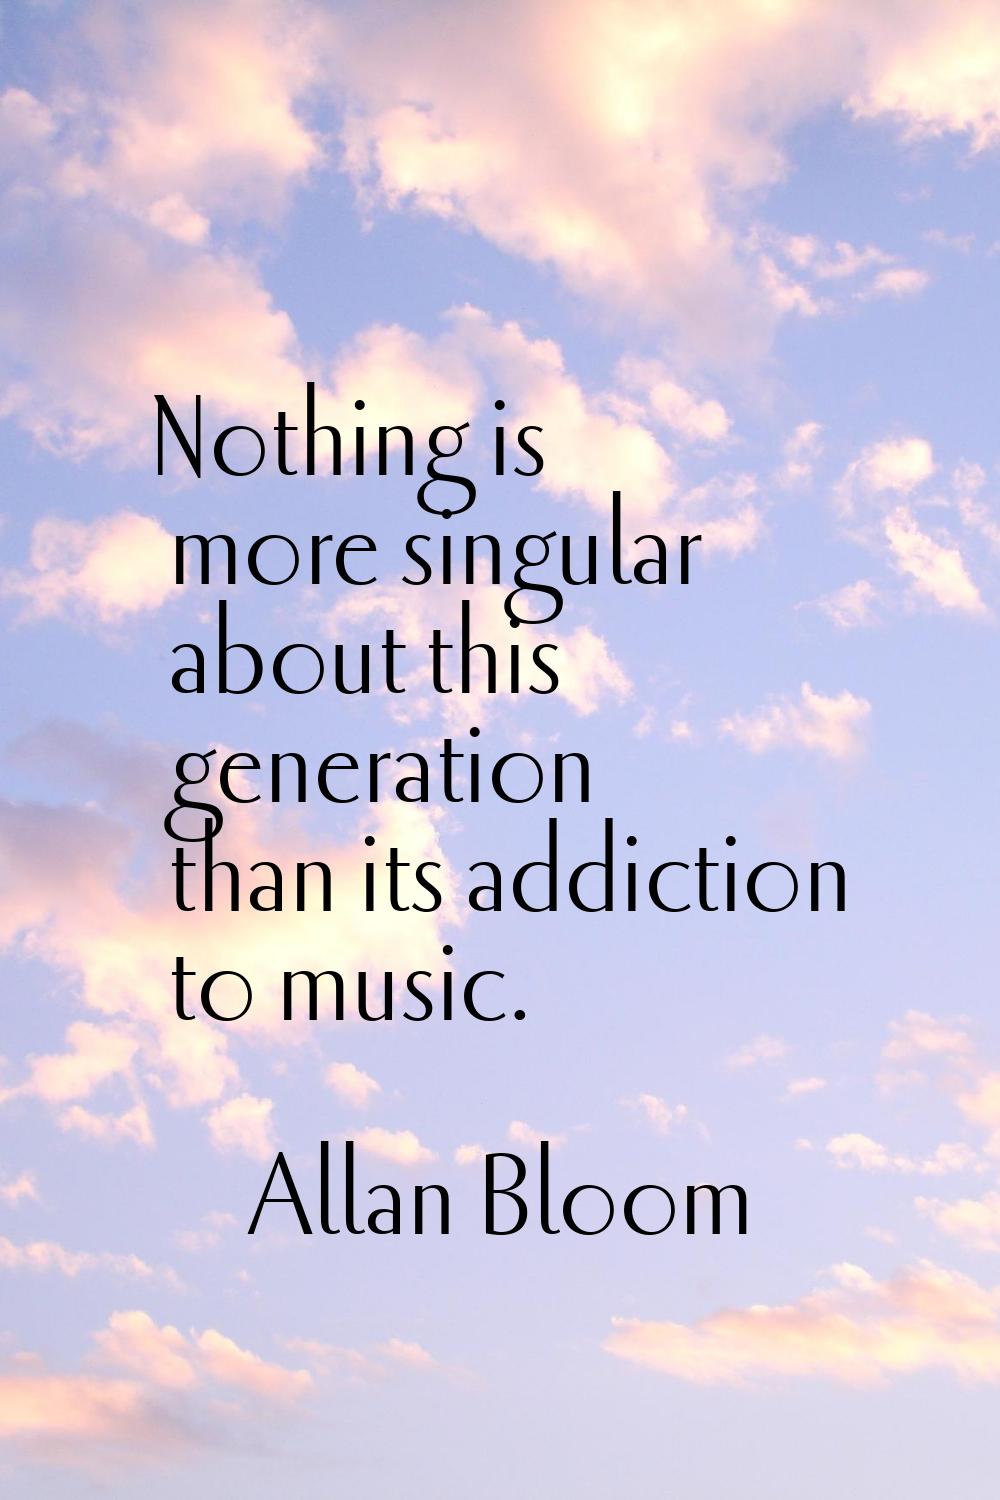 Nothing is more singular about this generation than its addiction to music.